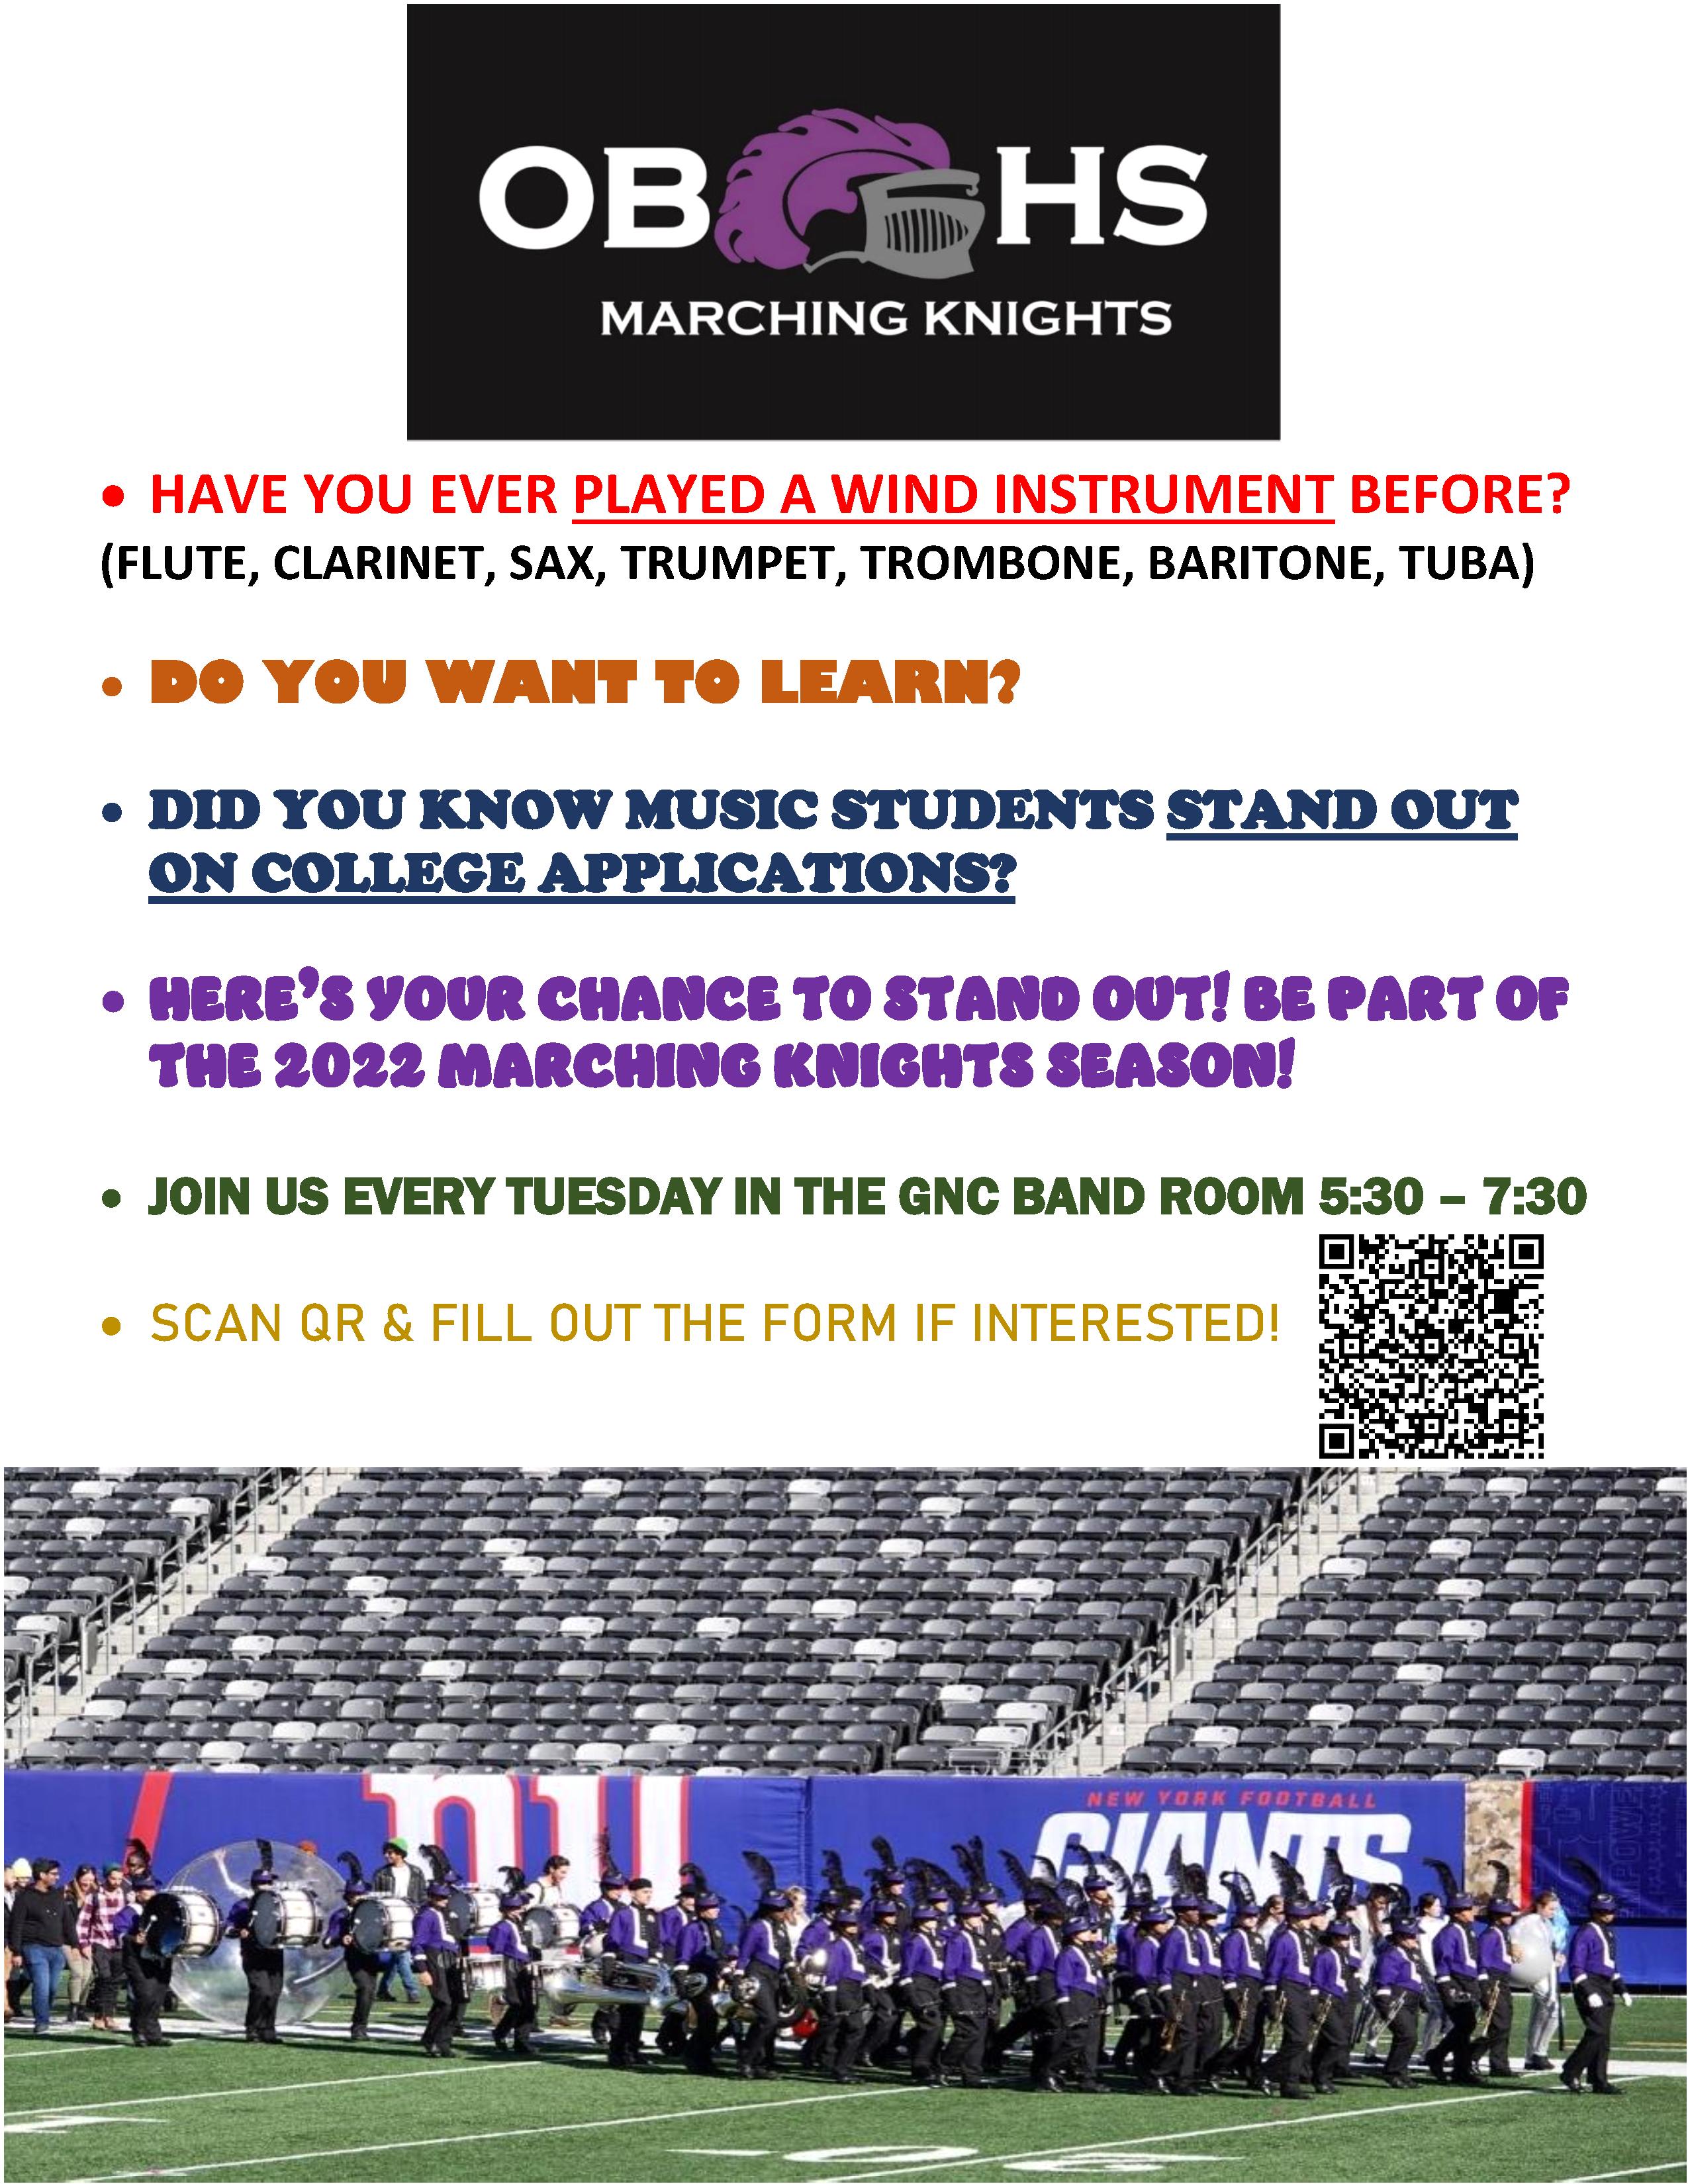 OBHS Marching Knights Recruitment Flyer